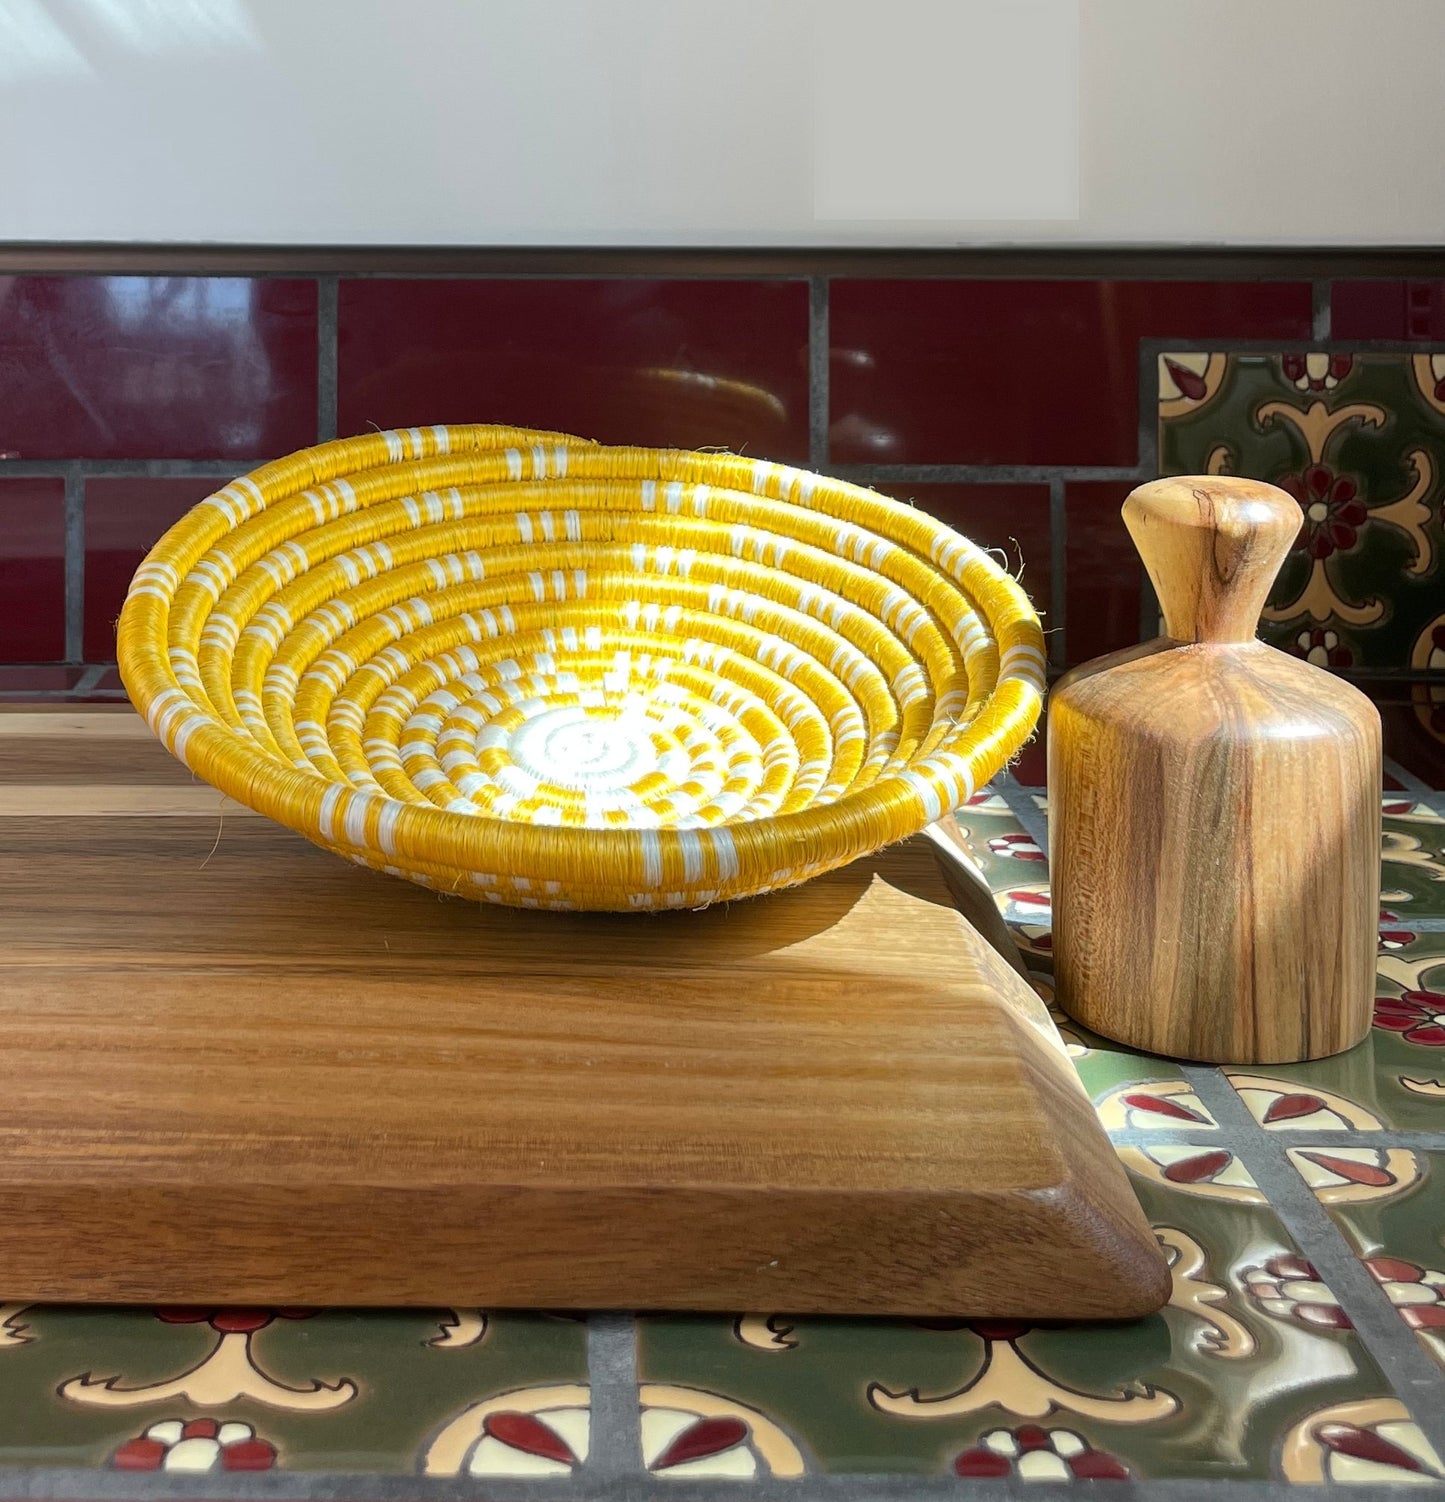 Sisal Bowl on kitchen counter with biscuit cutter